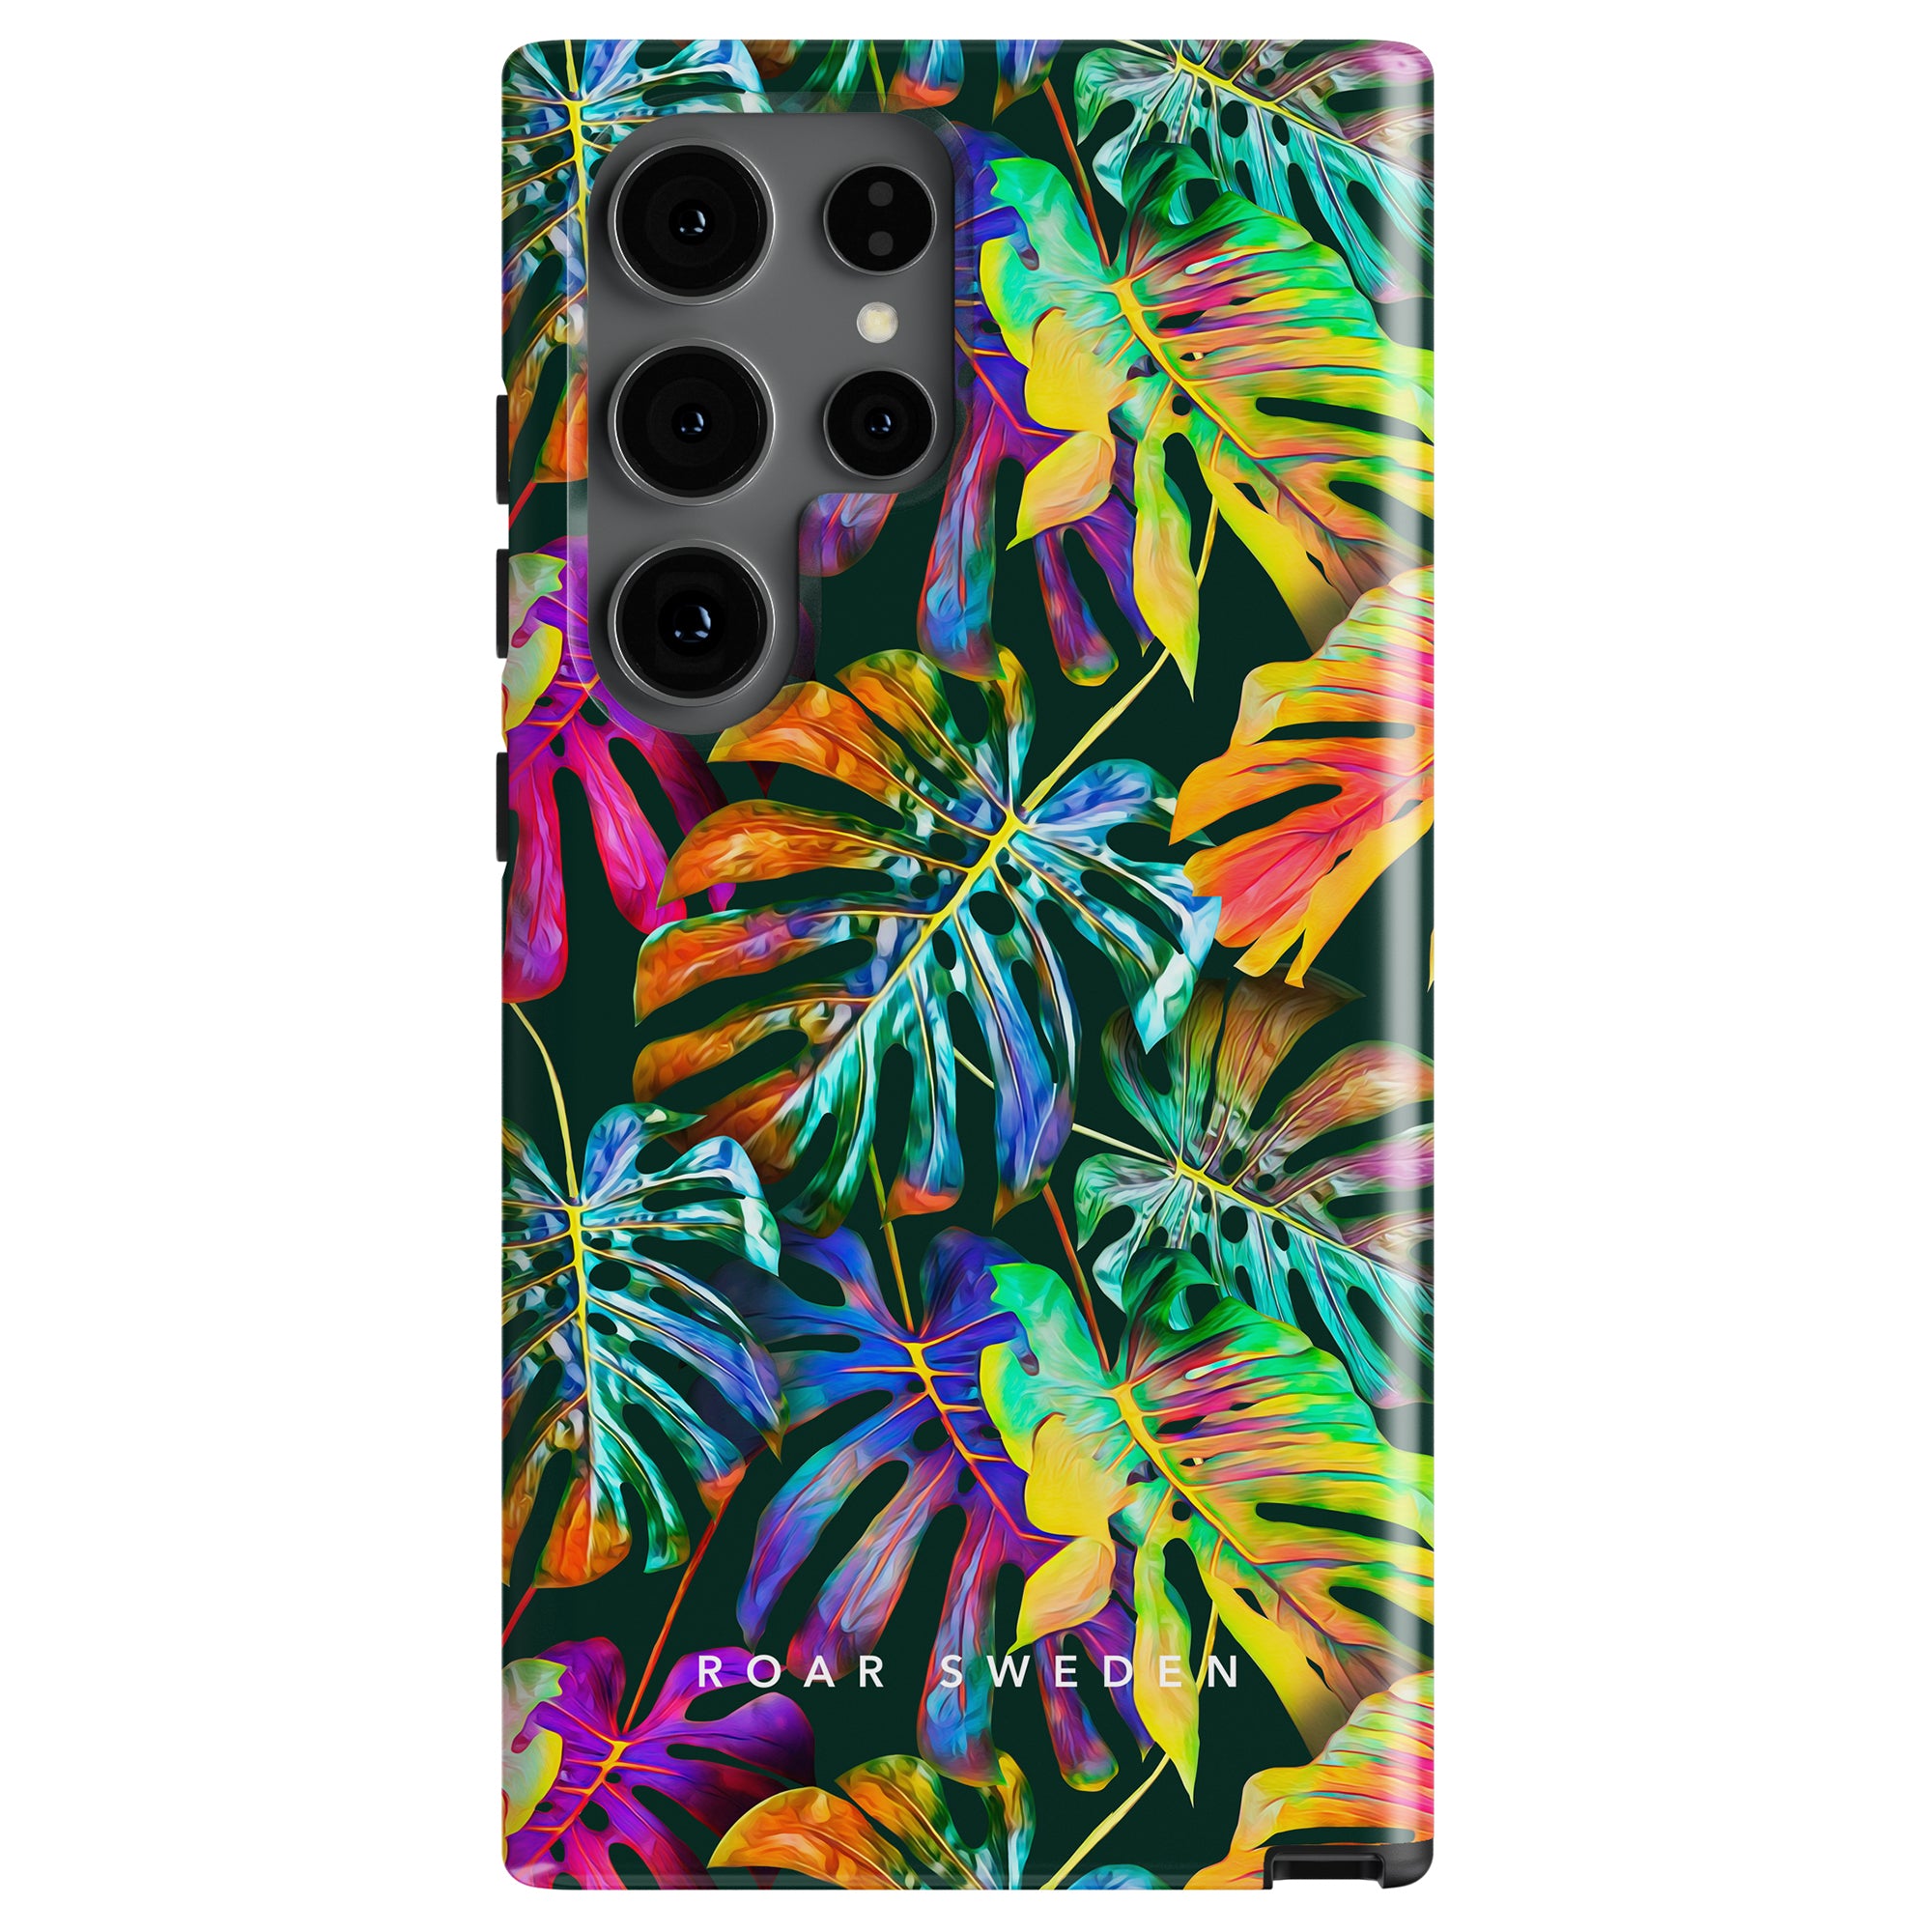 Vibrant Monstera - Tough case with a colorful tropical leaf design on a dark background, featuring the text "ROAR SWEDEN" at the bottom. This trendy och livlig look is made from högkvalitativt material.